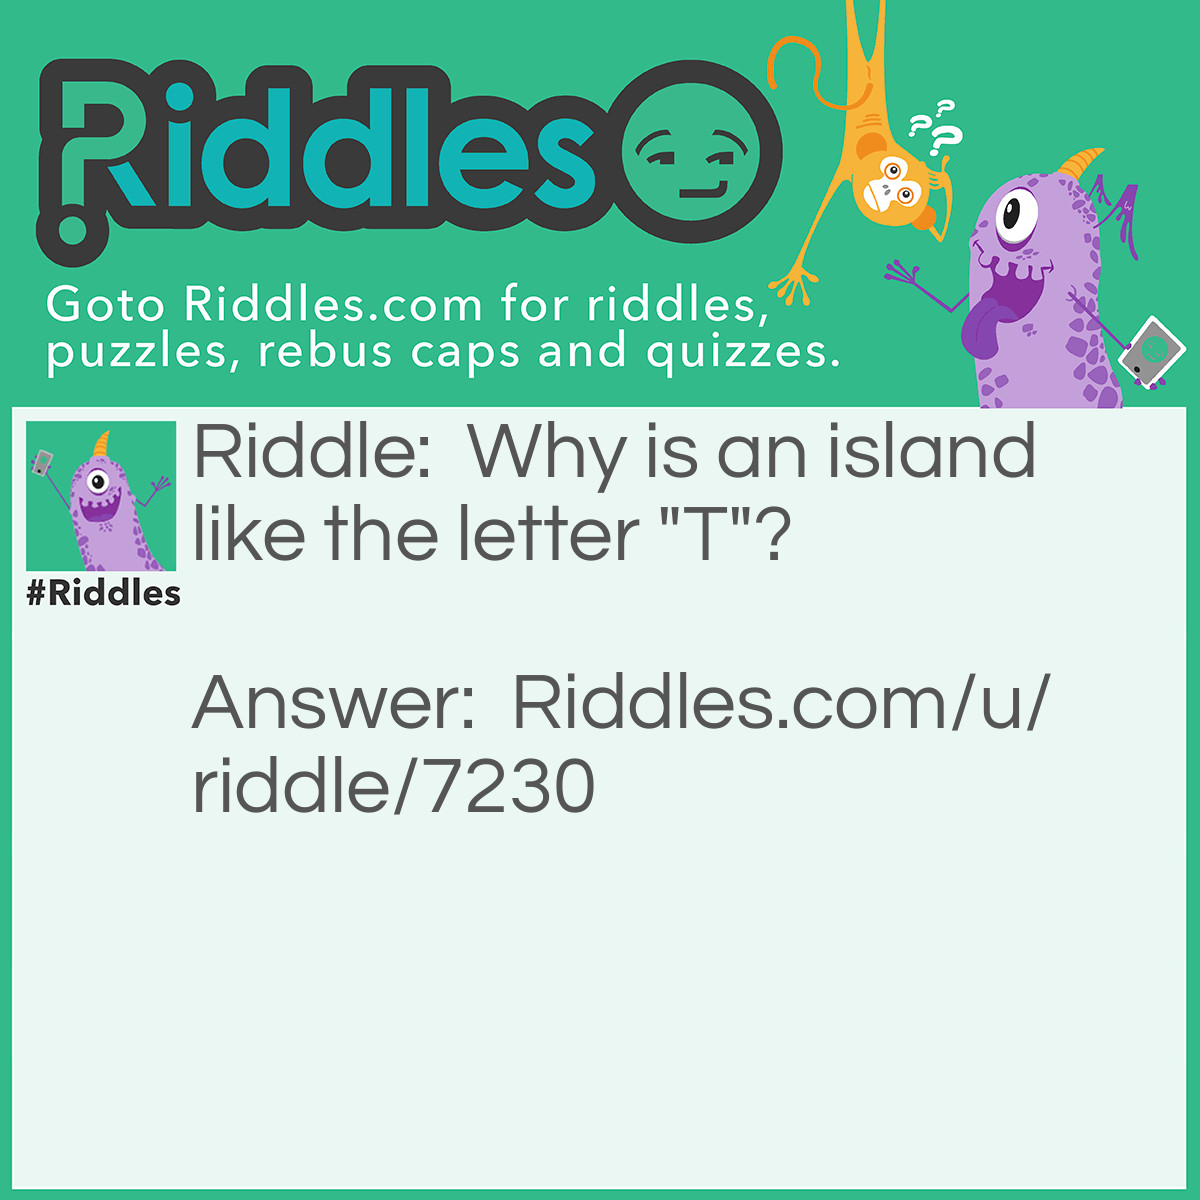 Riddle: Why is an island like the letter "T"? Answer: Because there both in the middle of the Water.